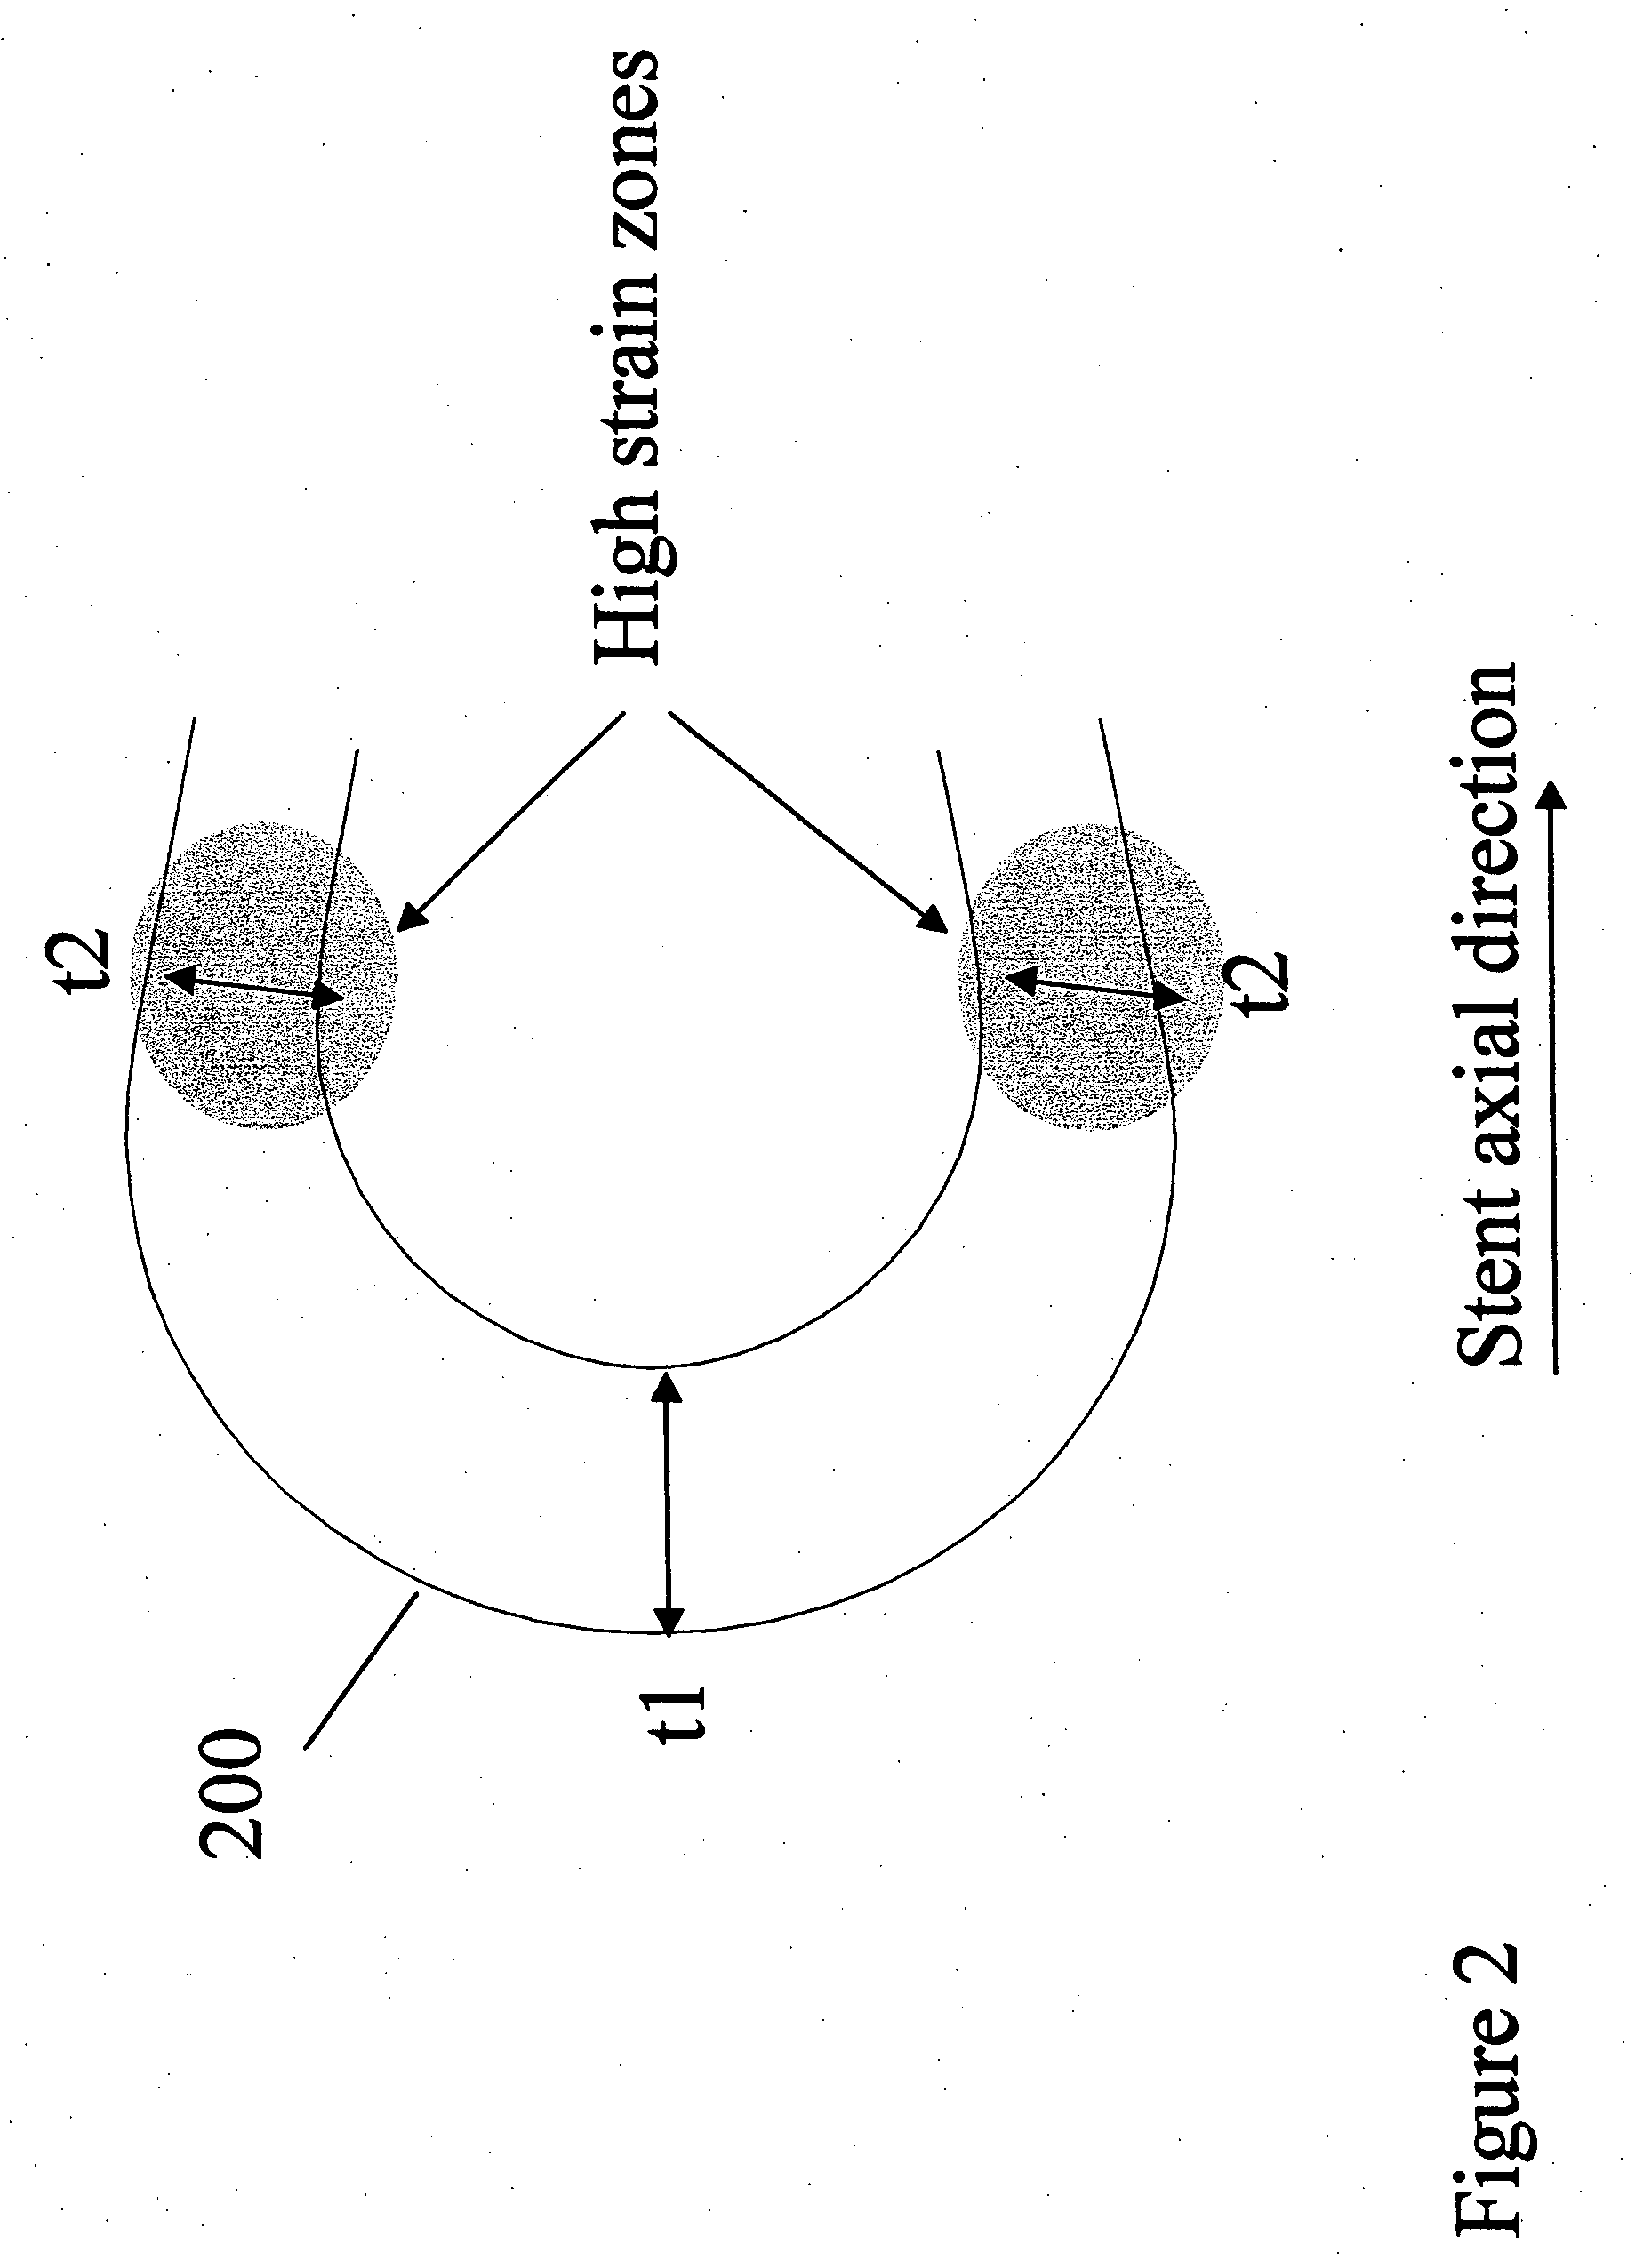 Polymeric stent having modified molecular structures in selected regions of the flexible connectors